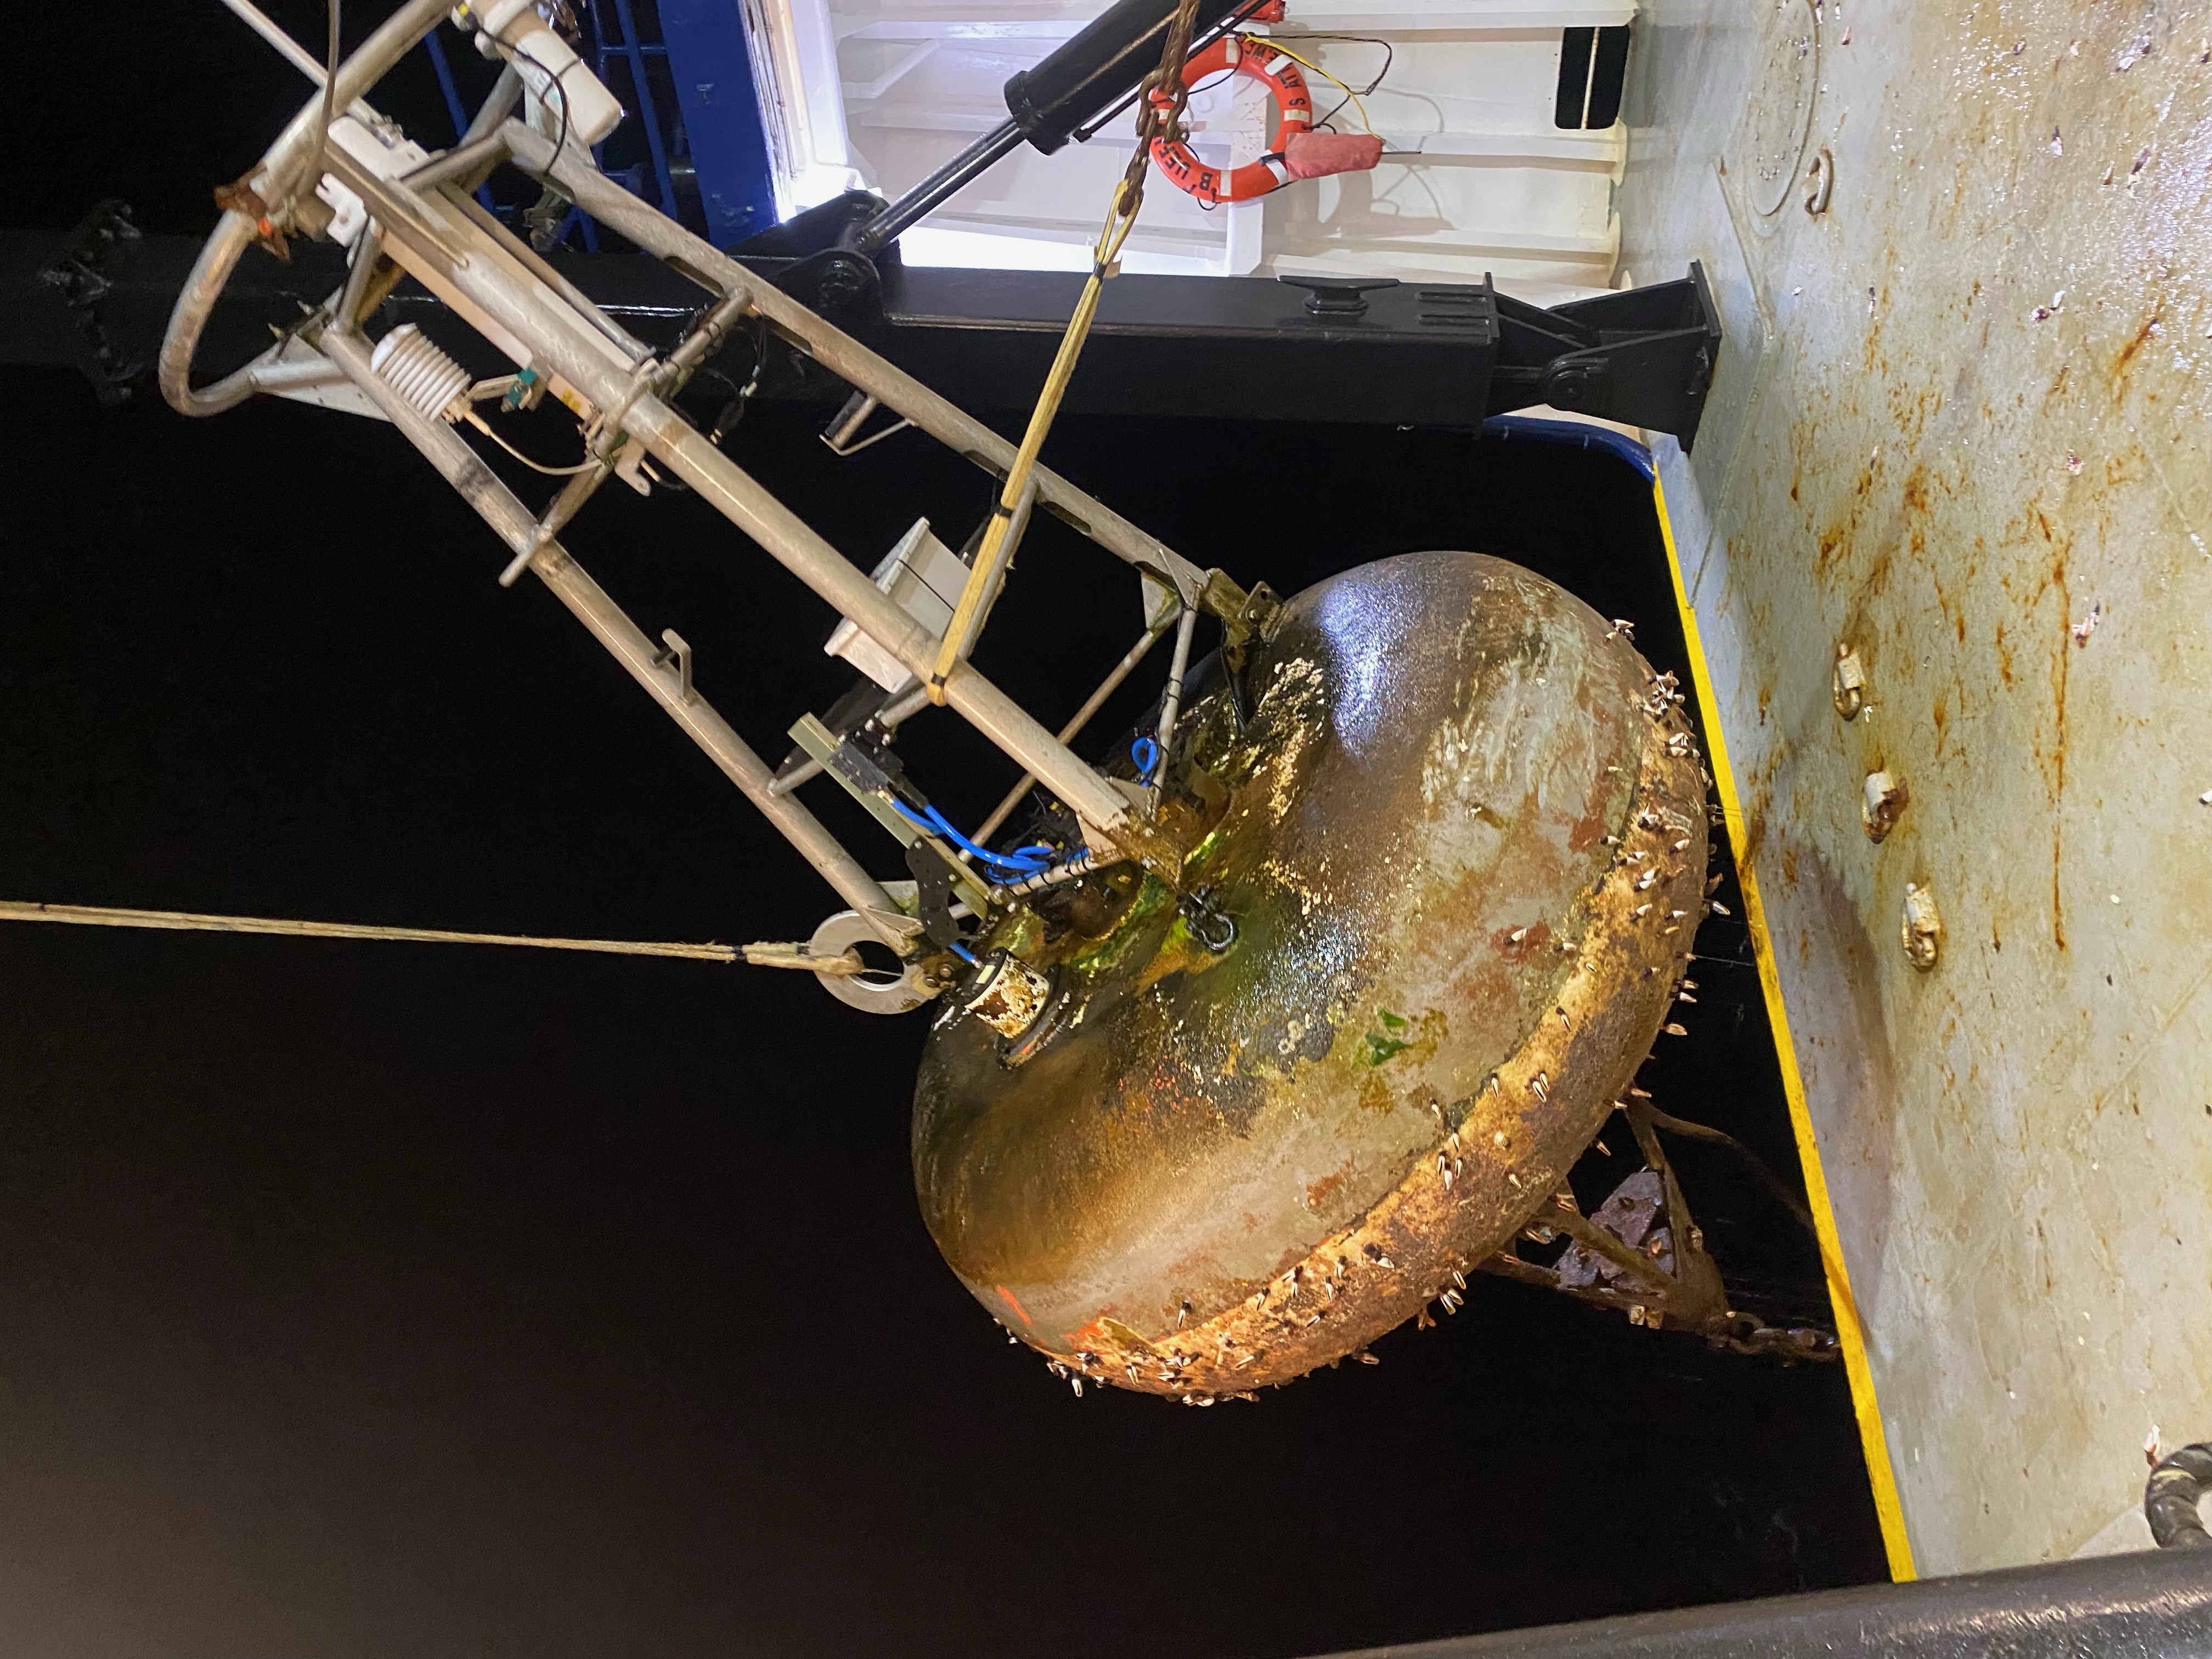 Nighttime retrieval of a TAO buoy. Technicians pulled this buoy aboard and deployed a new one. When a buoy has been in the water for a long time it may have shell life on the hull (seen here), which could result in injury to the crew. Technicians disassembled the buoy, pressure washed the hull and mounted a new mast and sensors. The refurbished buoy was deployed in a new location.  